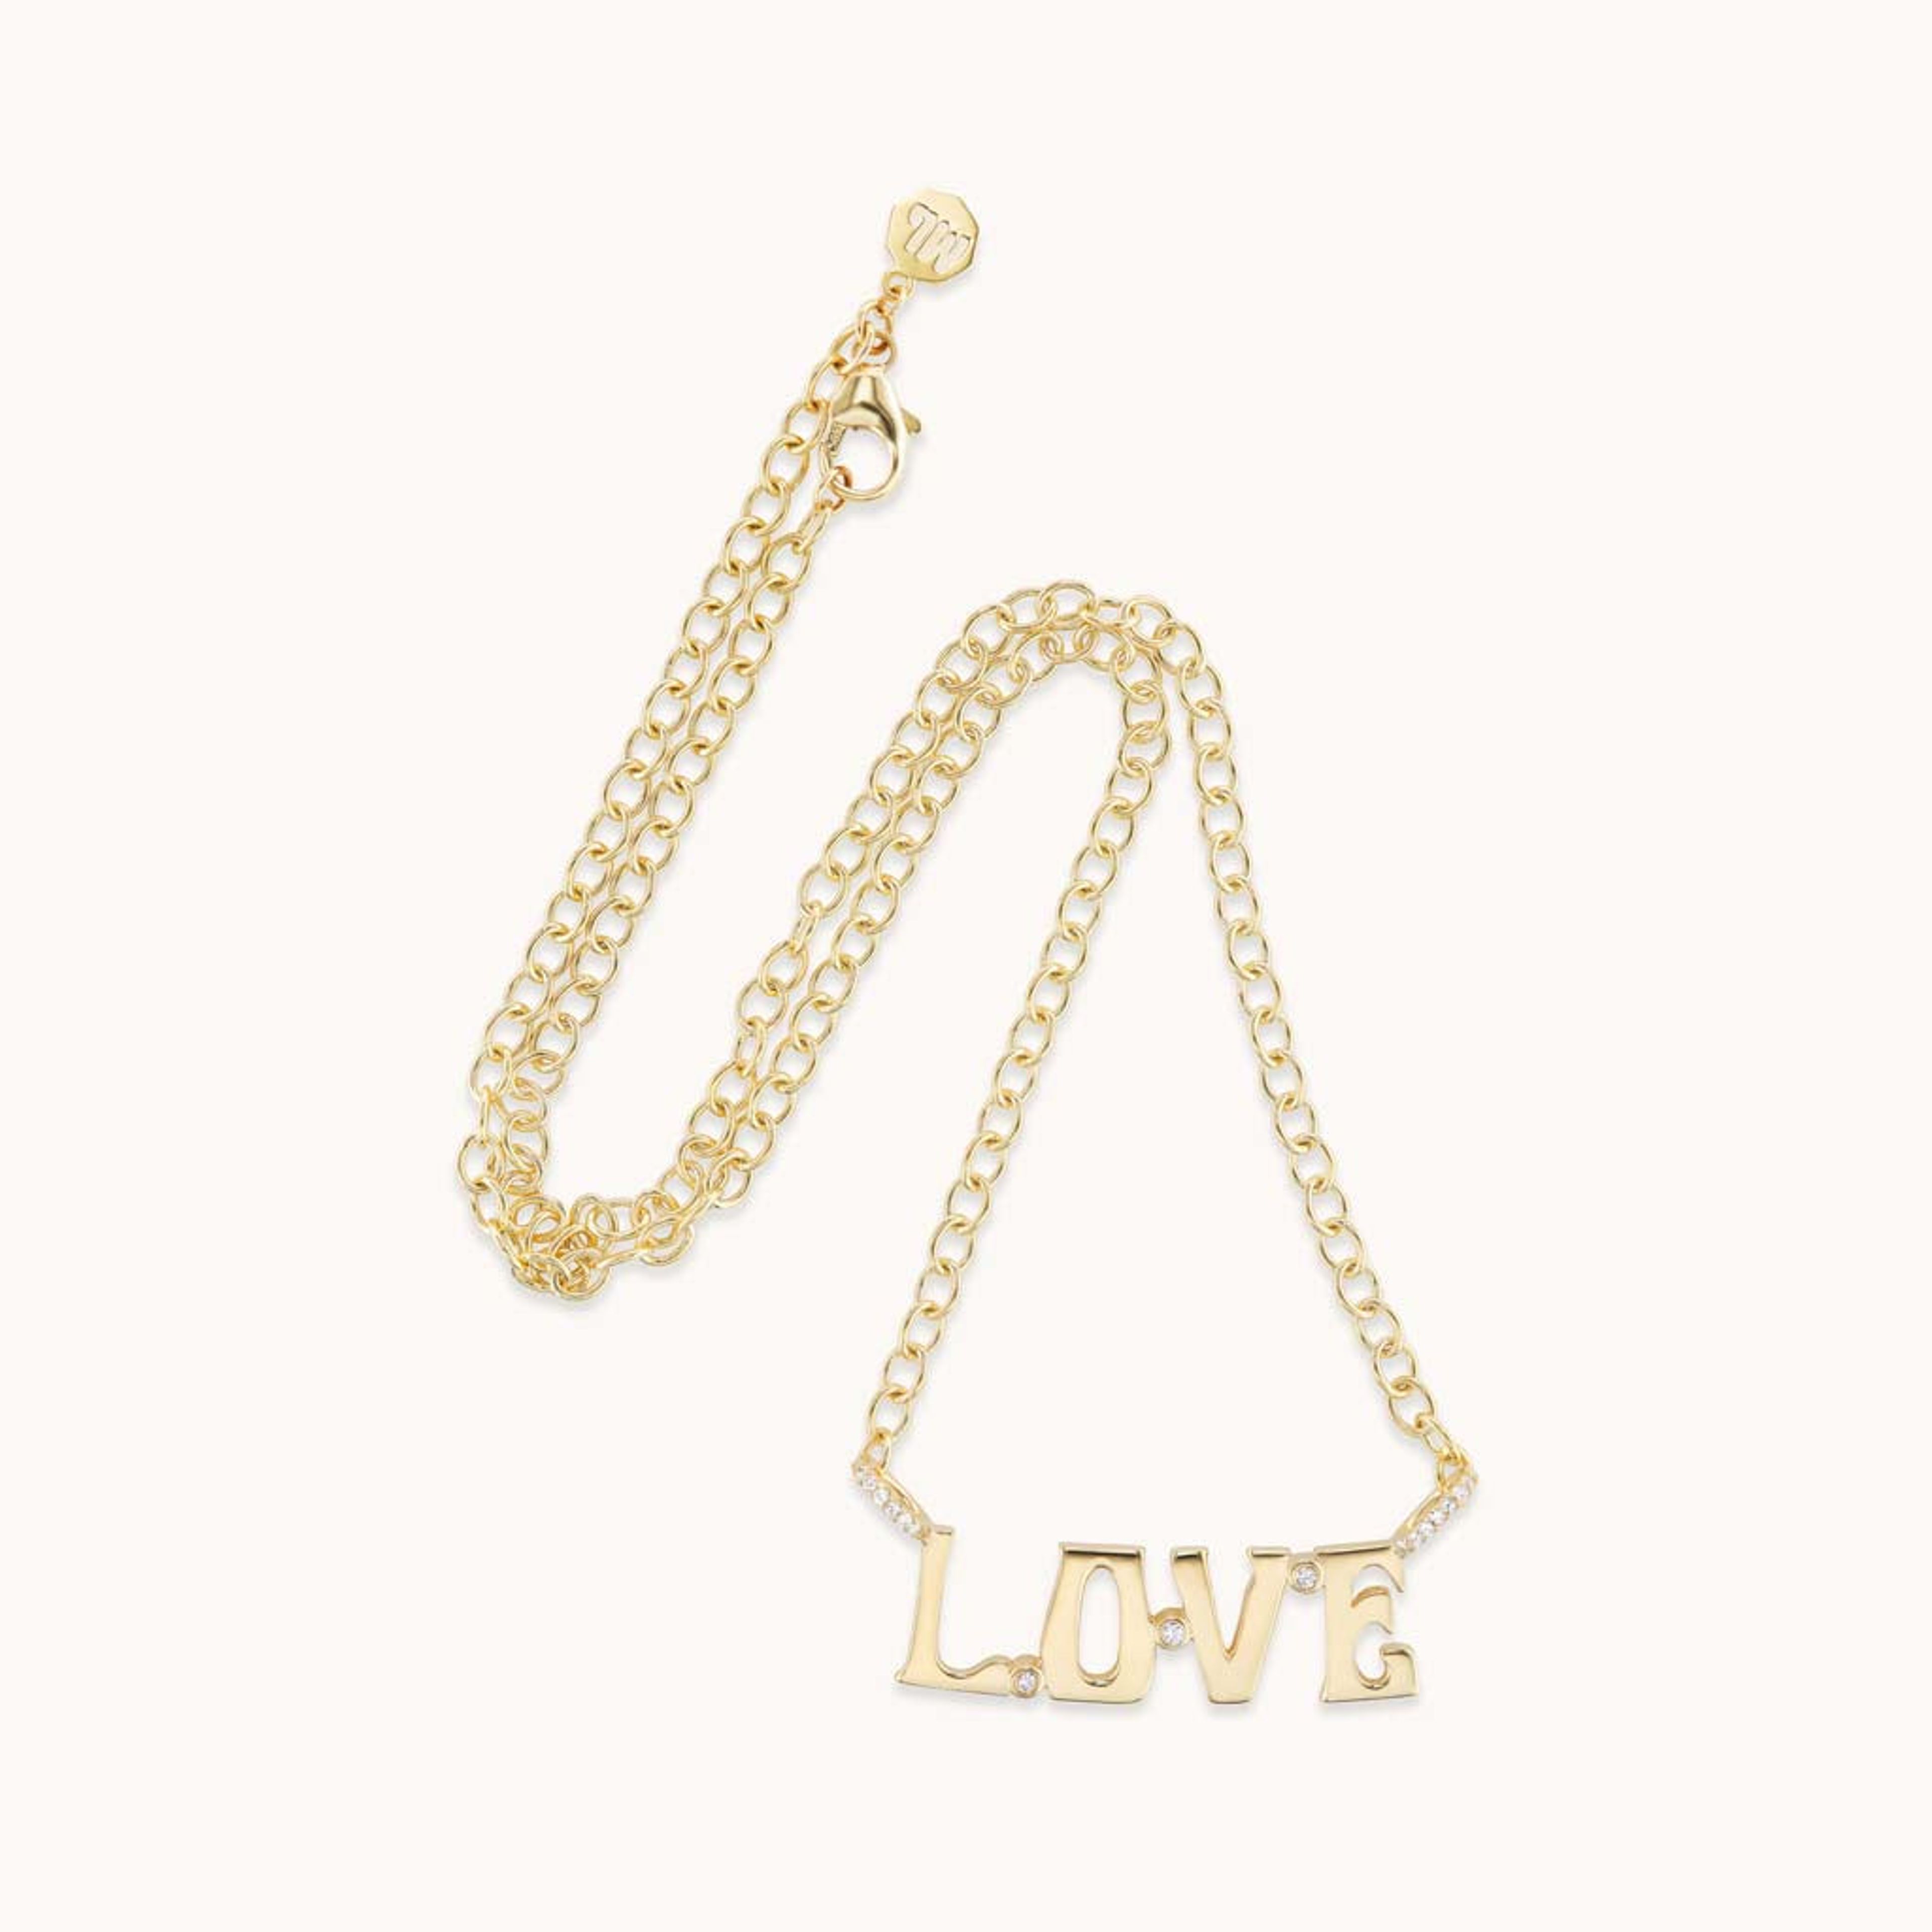 Nameplate Necklace "Love"